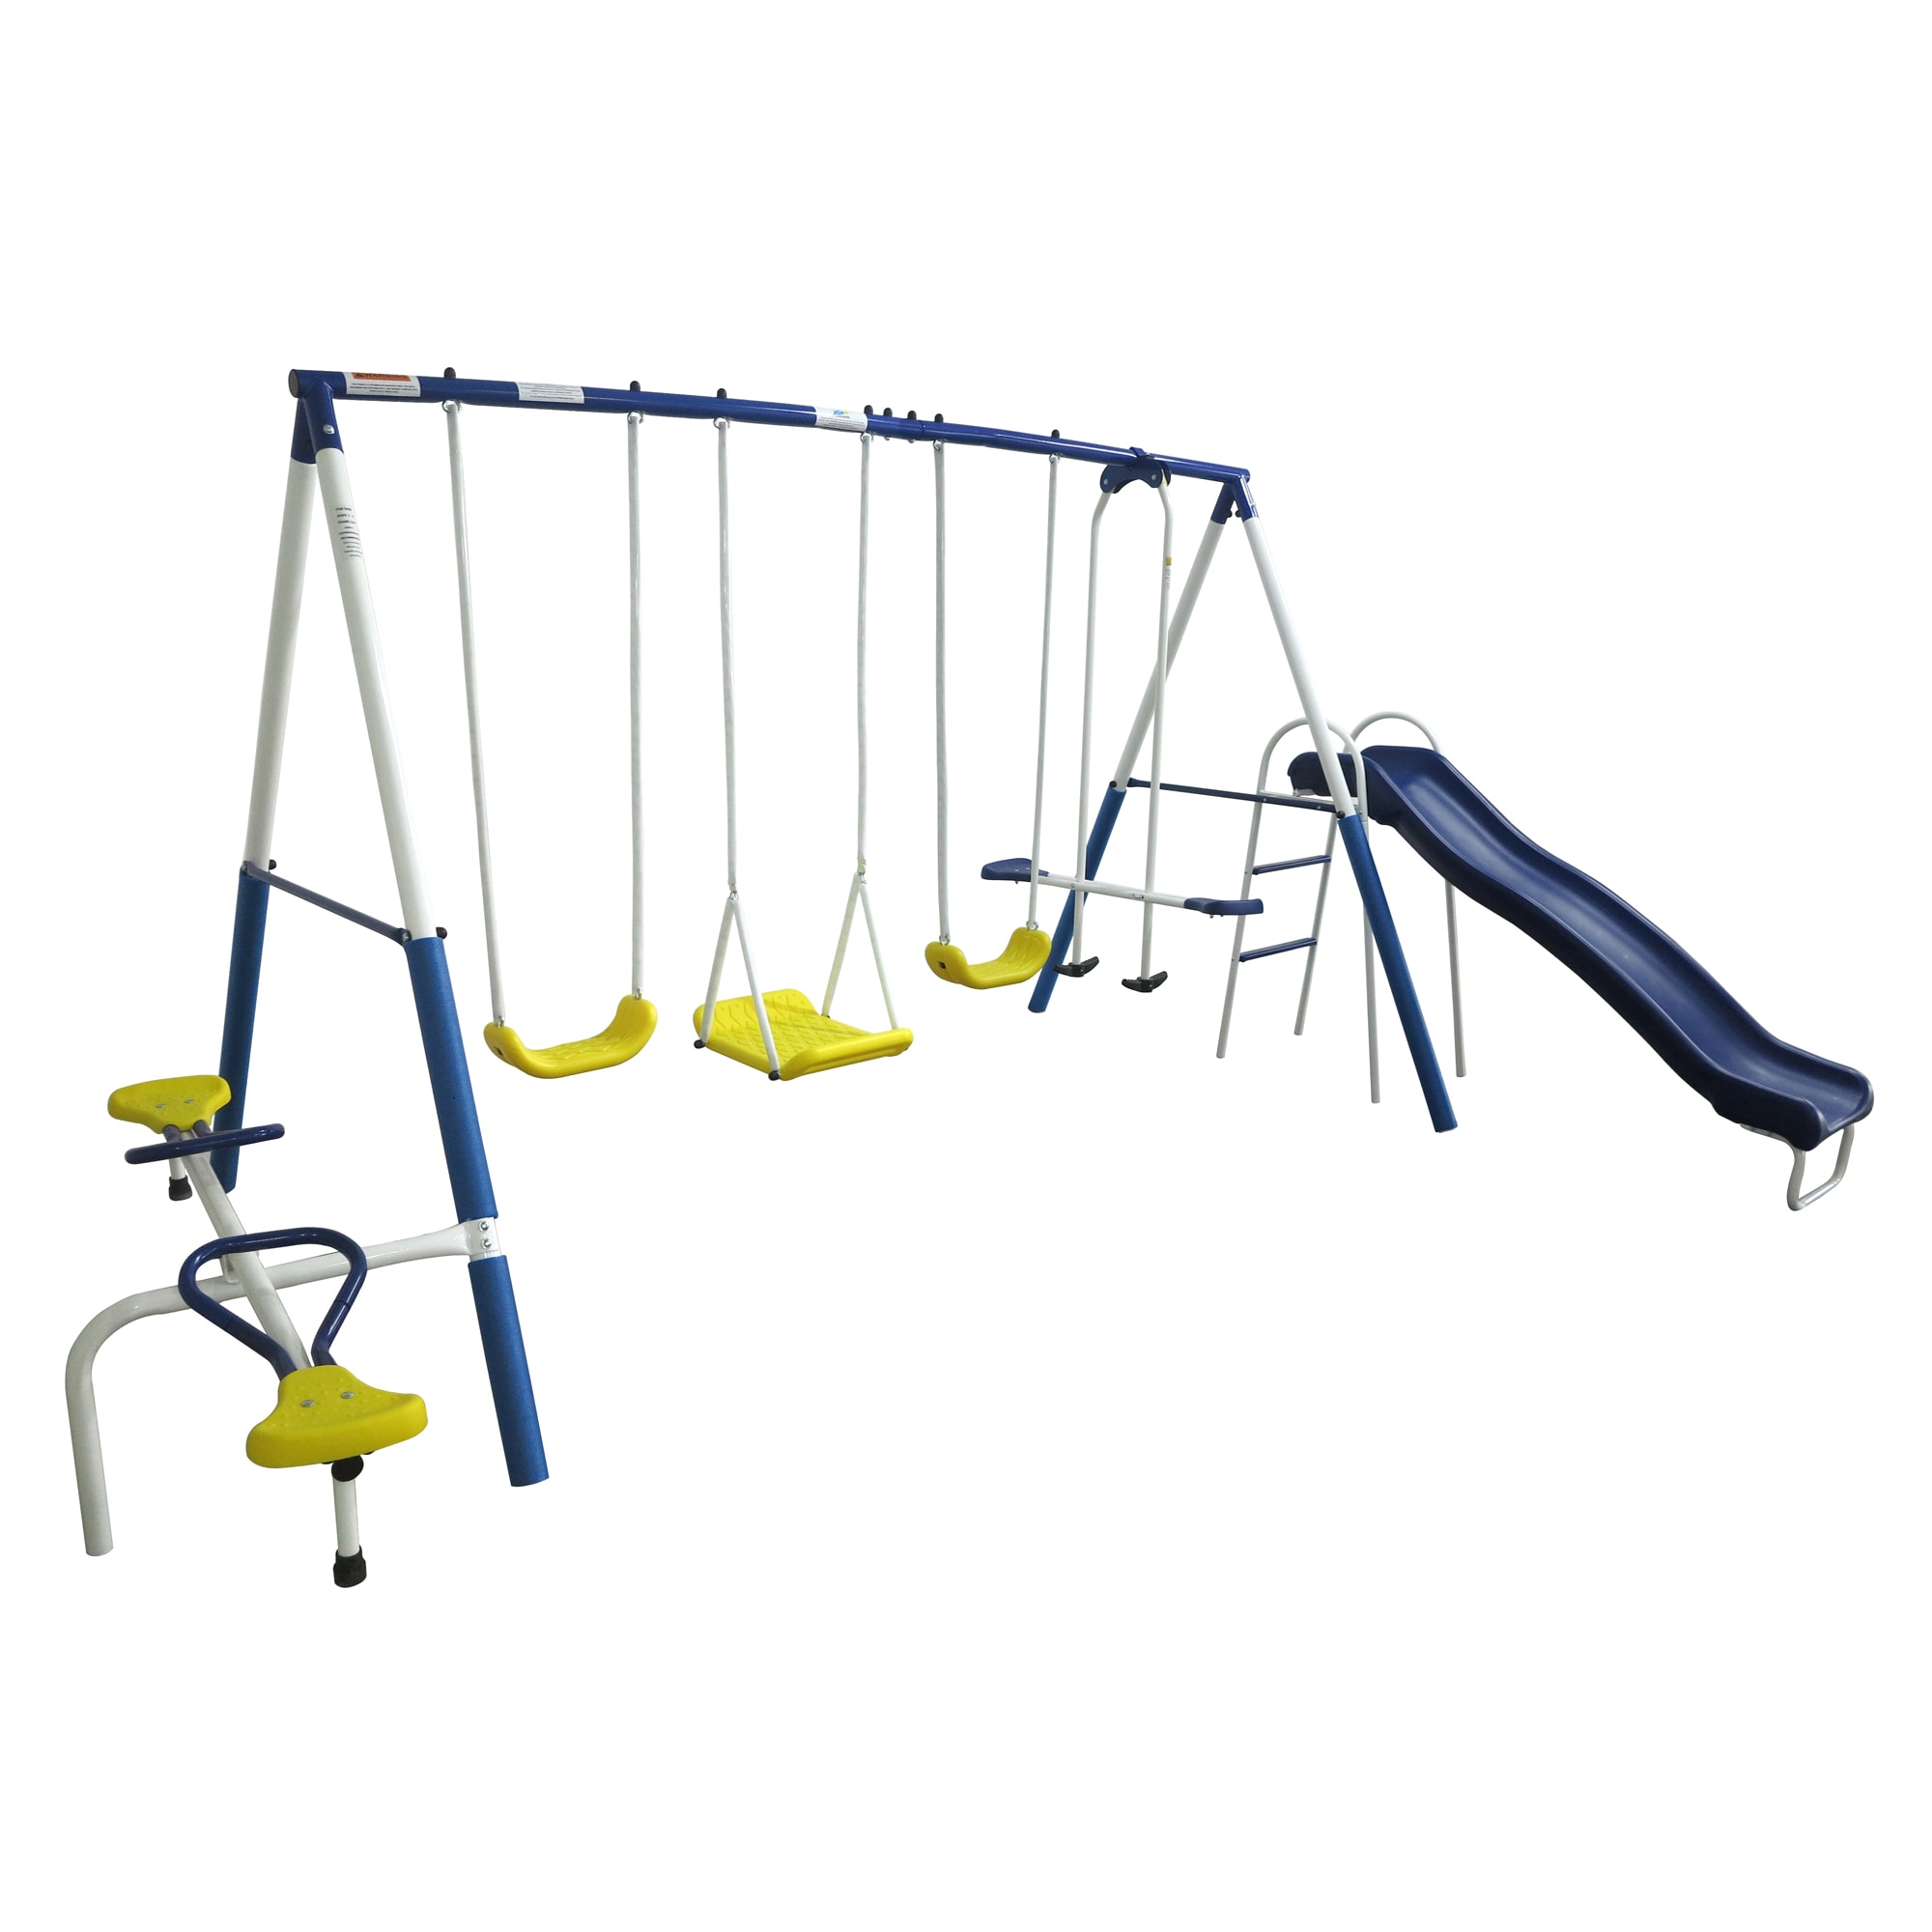 Heavy Duty Slide Swing Set Playground Toddler Kids Play Time Outdoor Backyard 